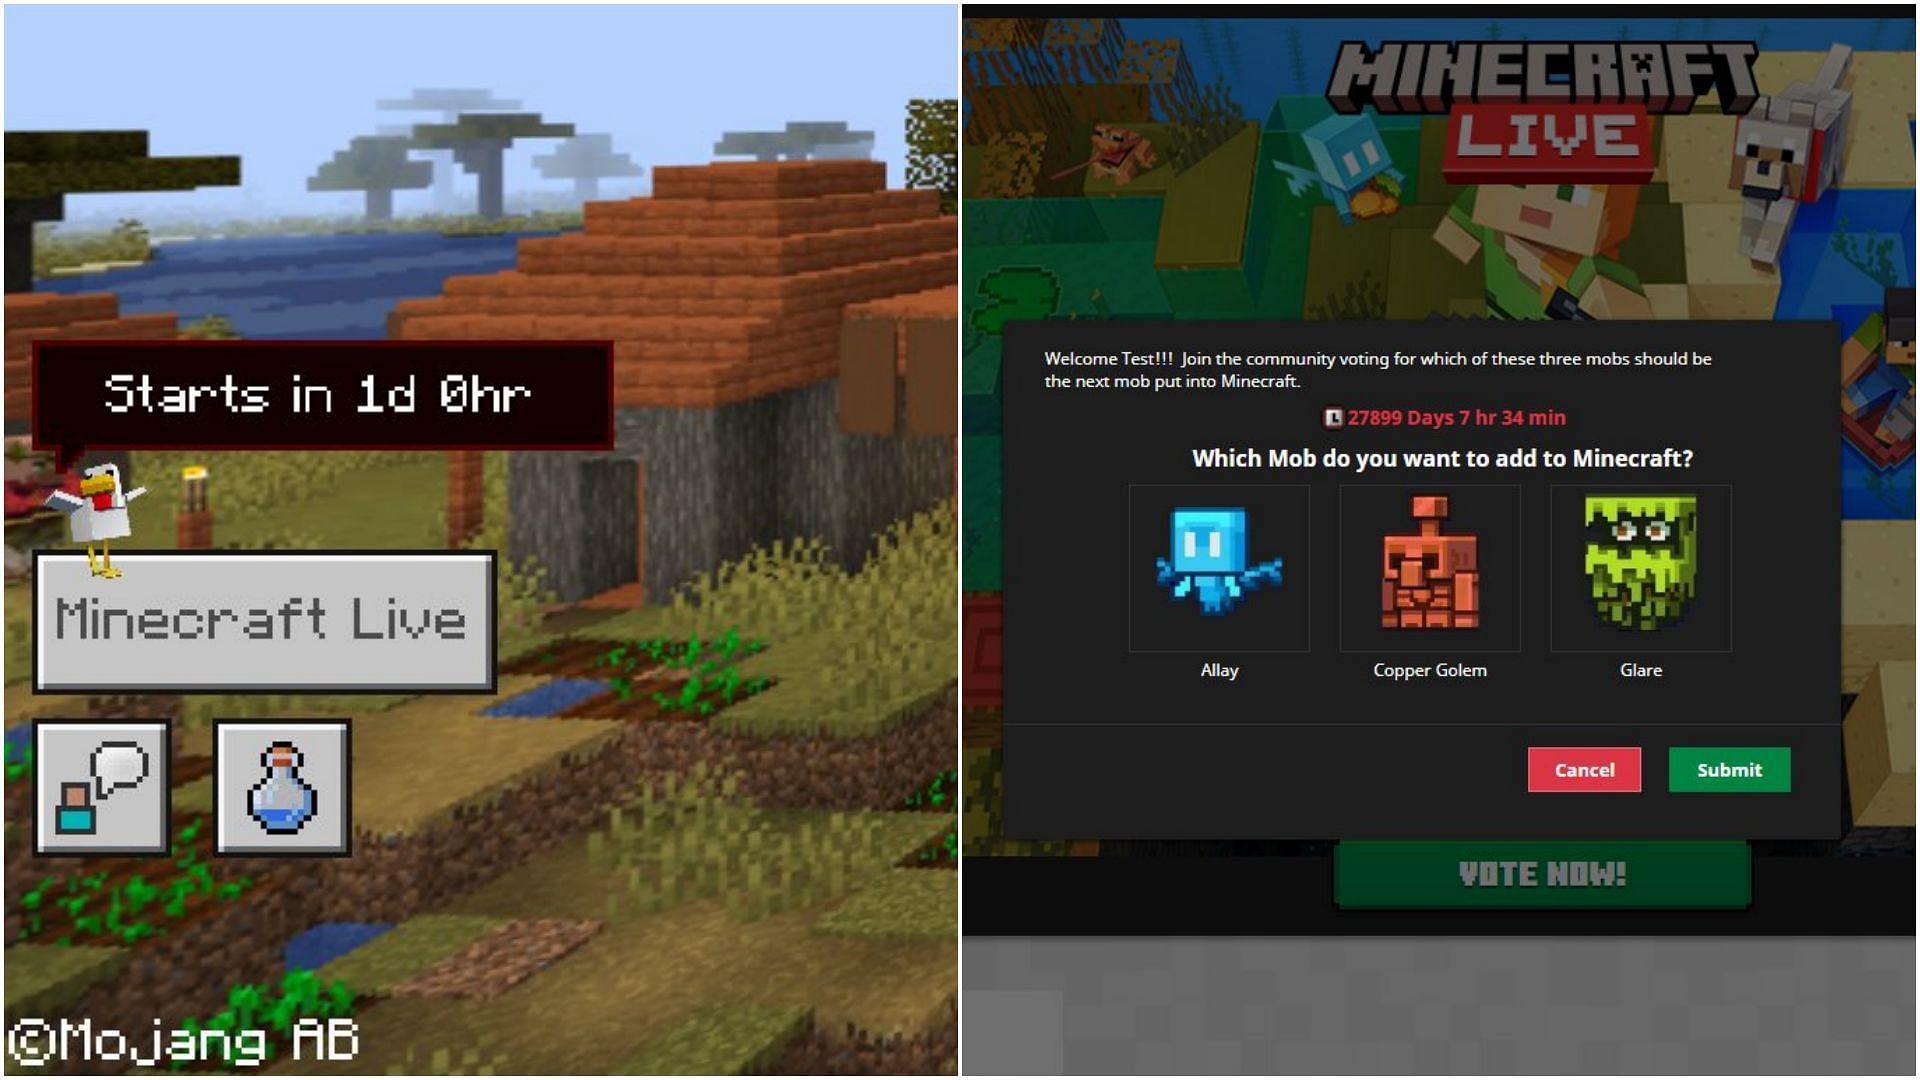 Minecraft Live's next mob vote is happening in-game